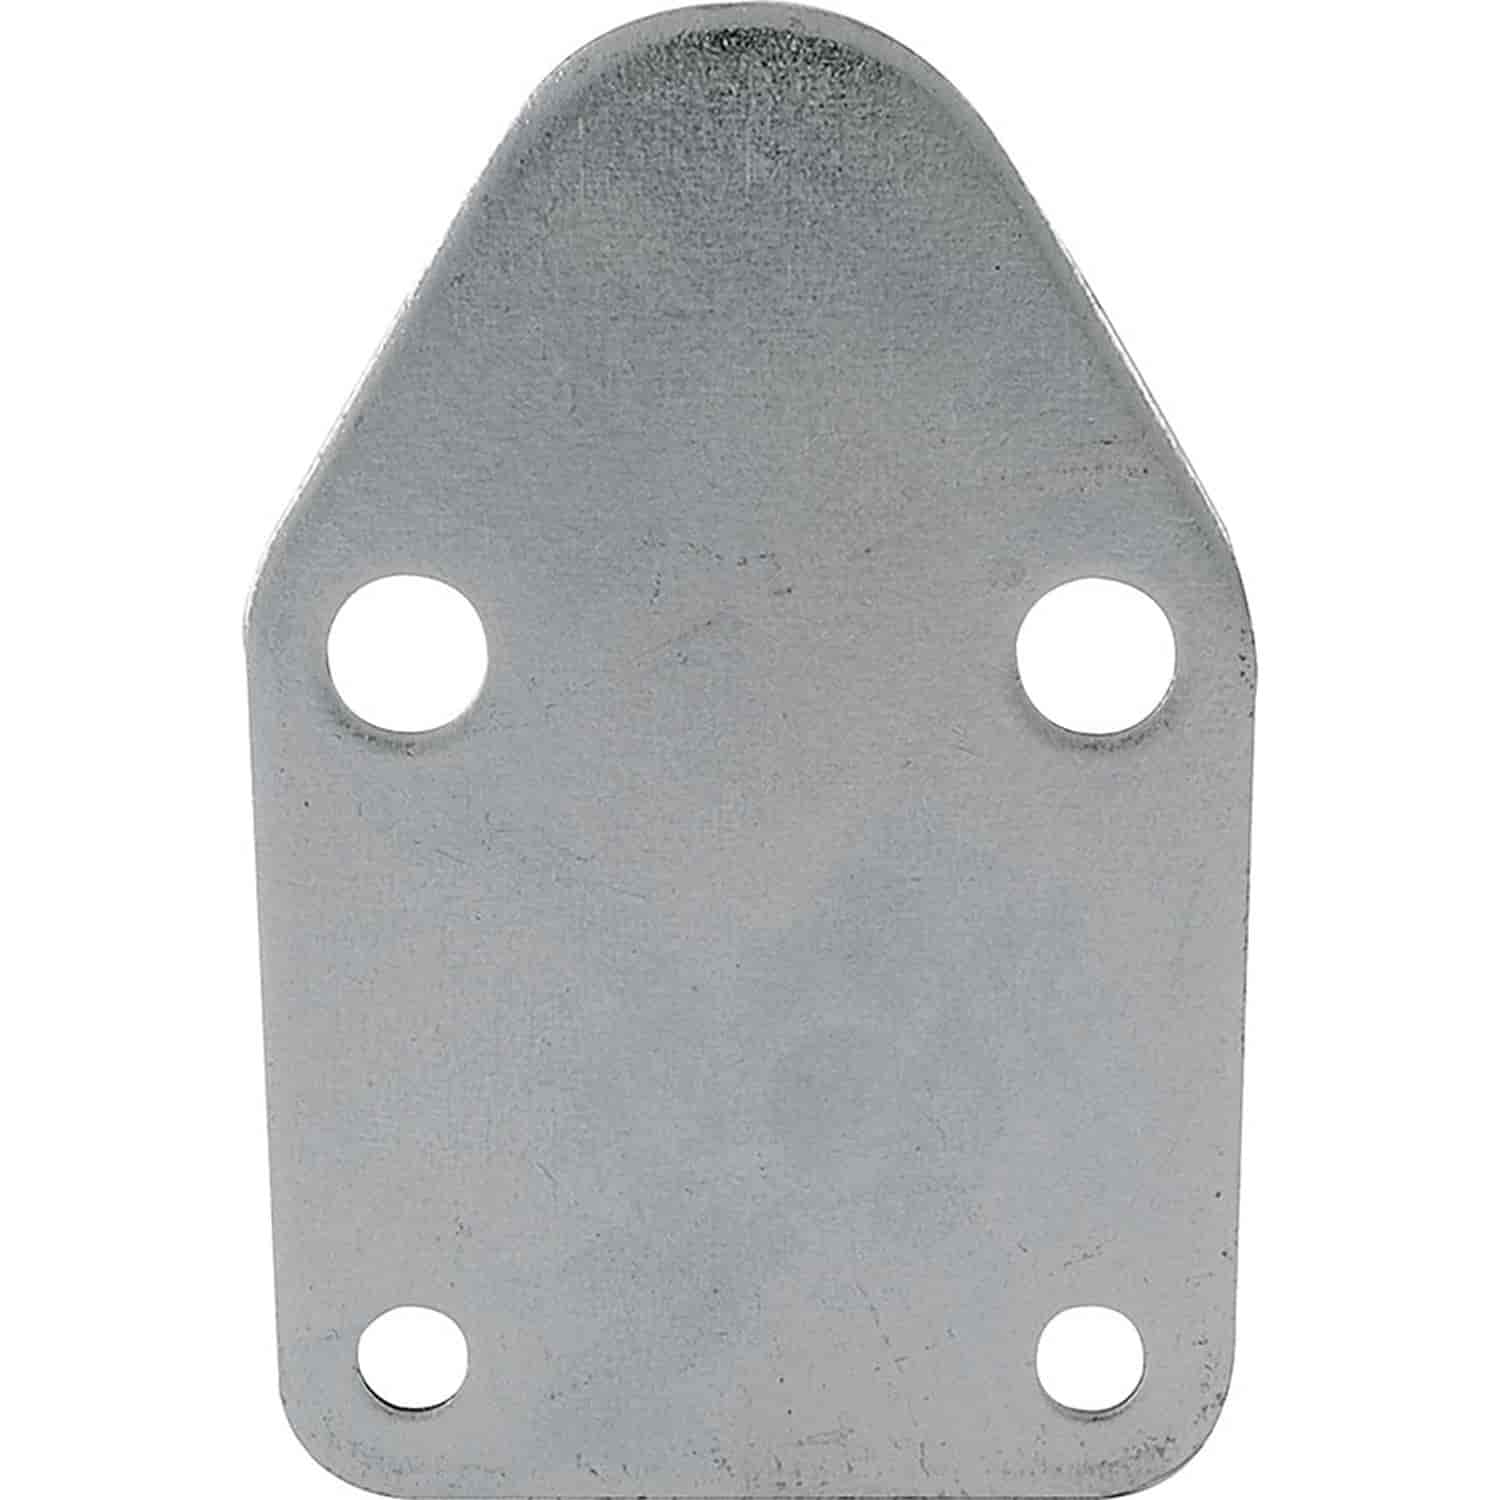 Fuel Pump Block Off Plate 1/8" Thick Steel